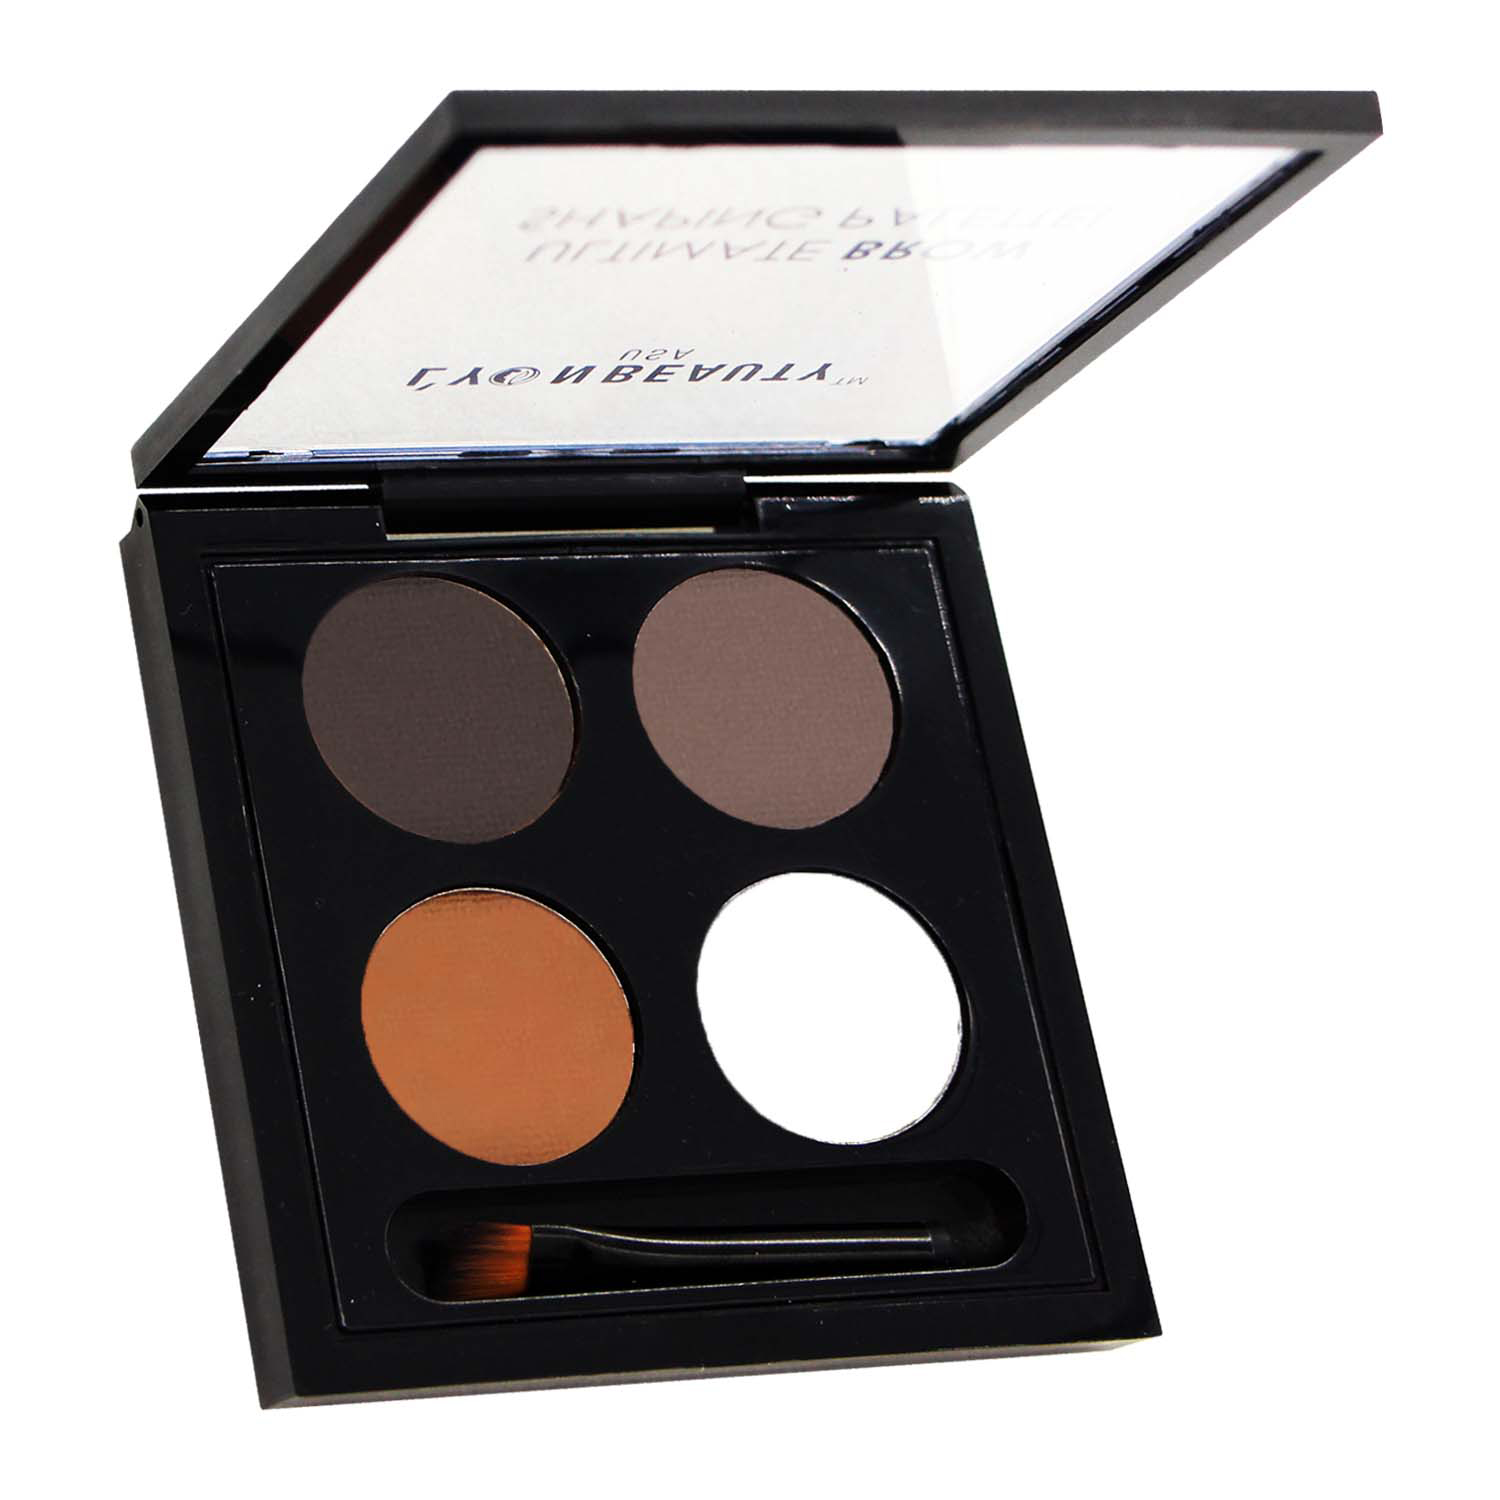 Lyon Beauty USA Ultimate Brow Shaping Palette, 1gm-Shade 02